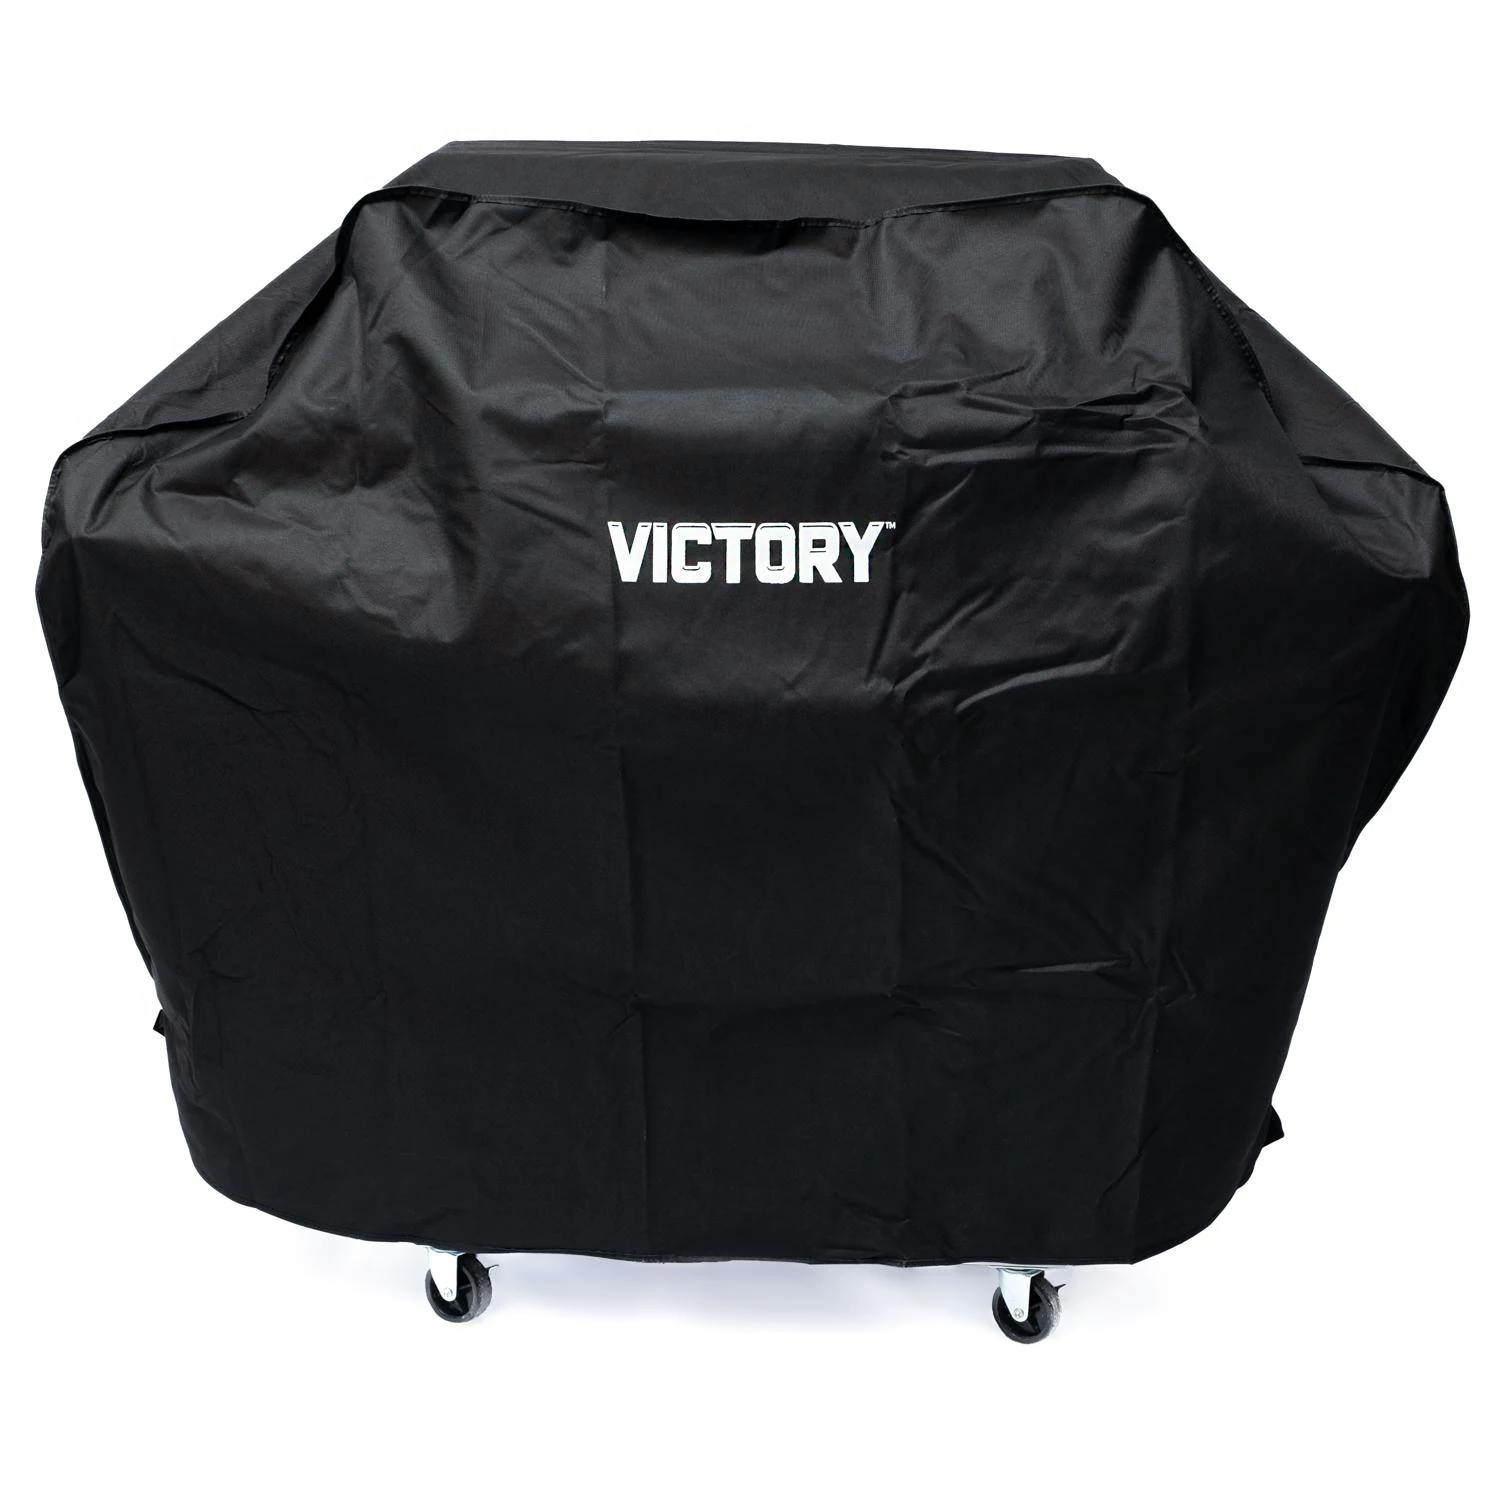 Victory Grill Cover for 3-Burner Gas Grill with Infrared Side Burner